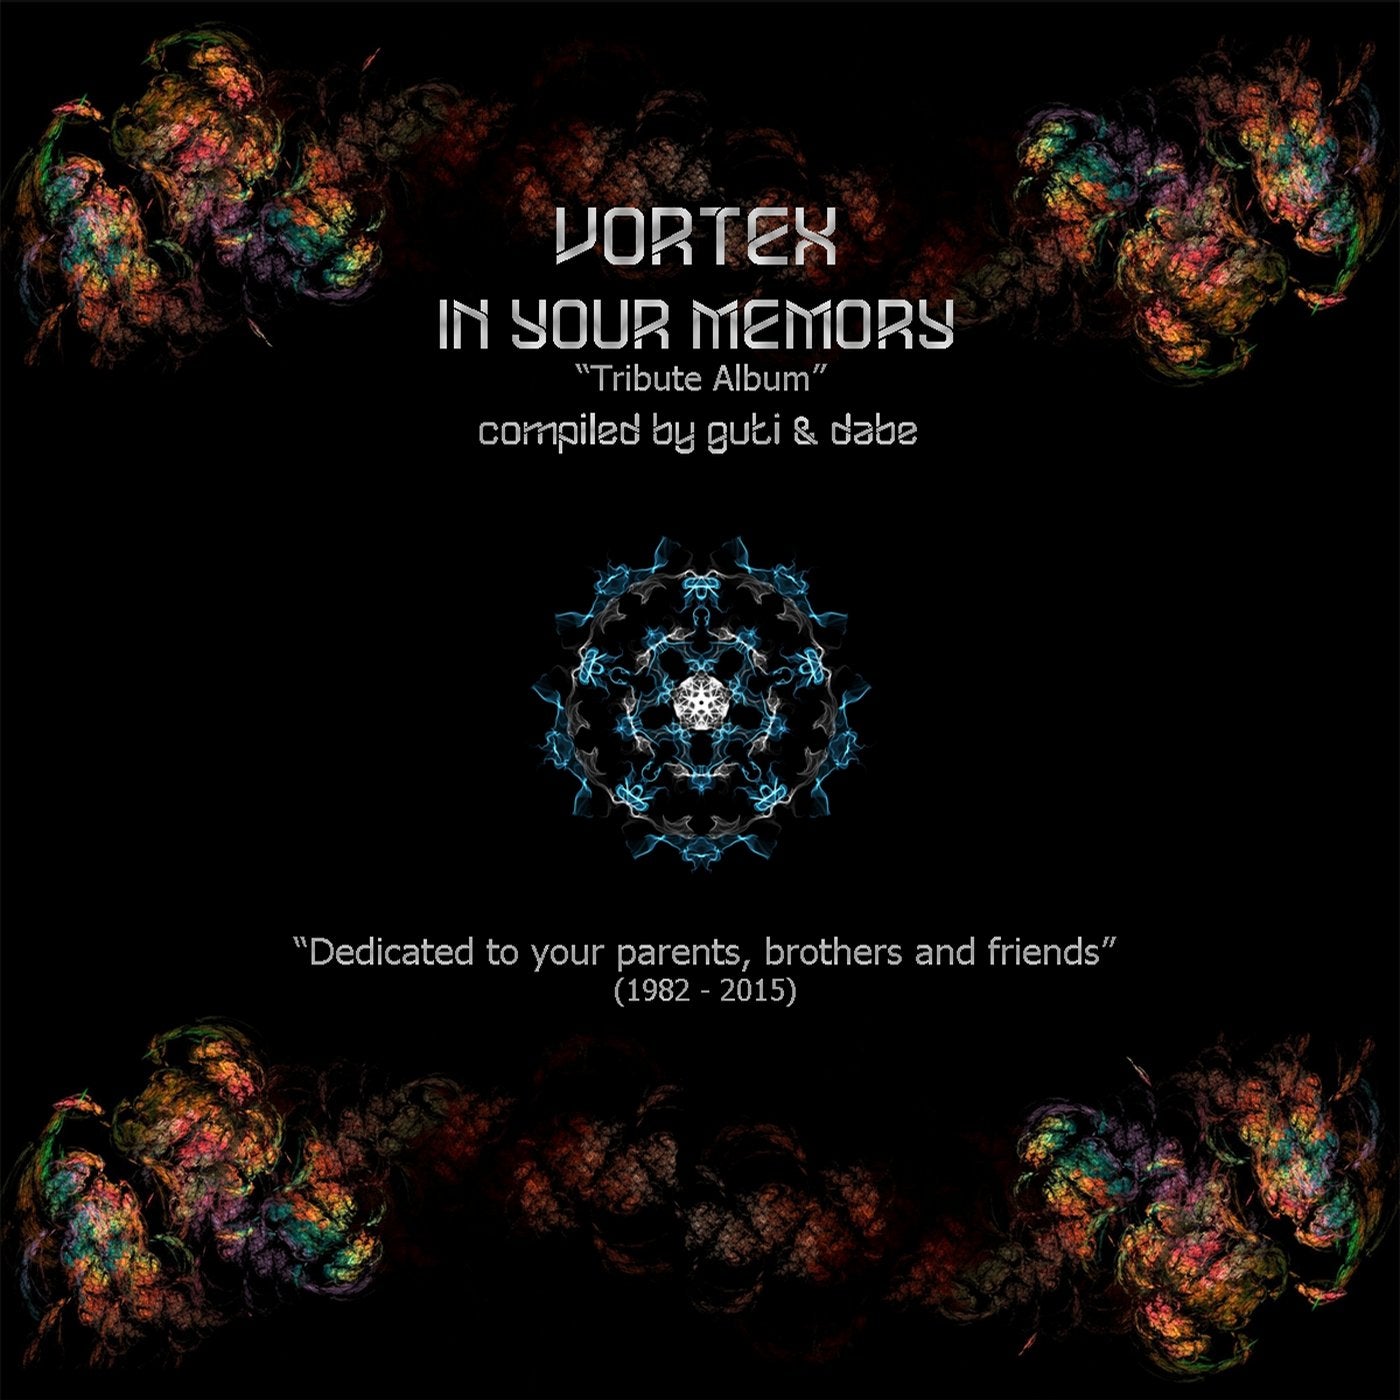 Vortex In Your Memory (Tribute Album) (compiled by guti and dabe)